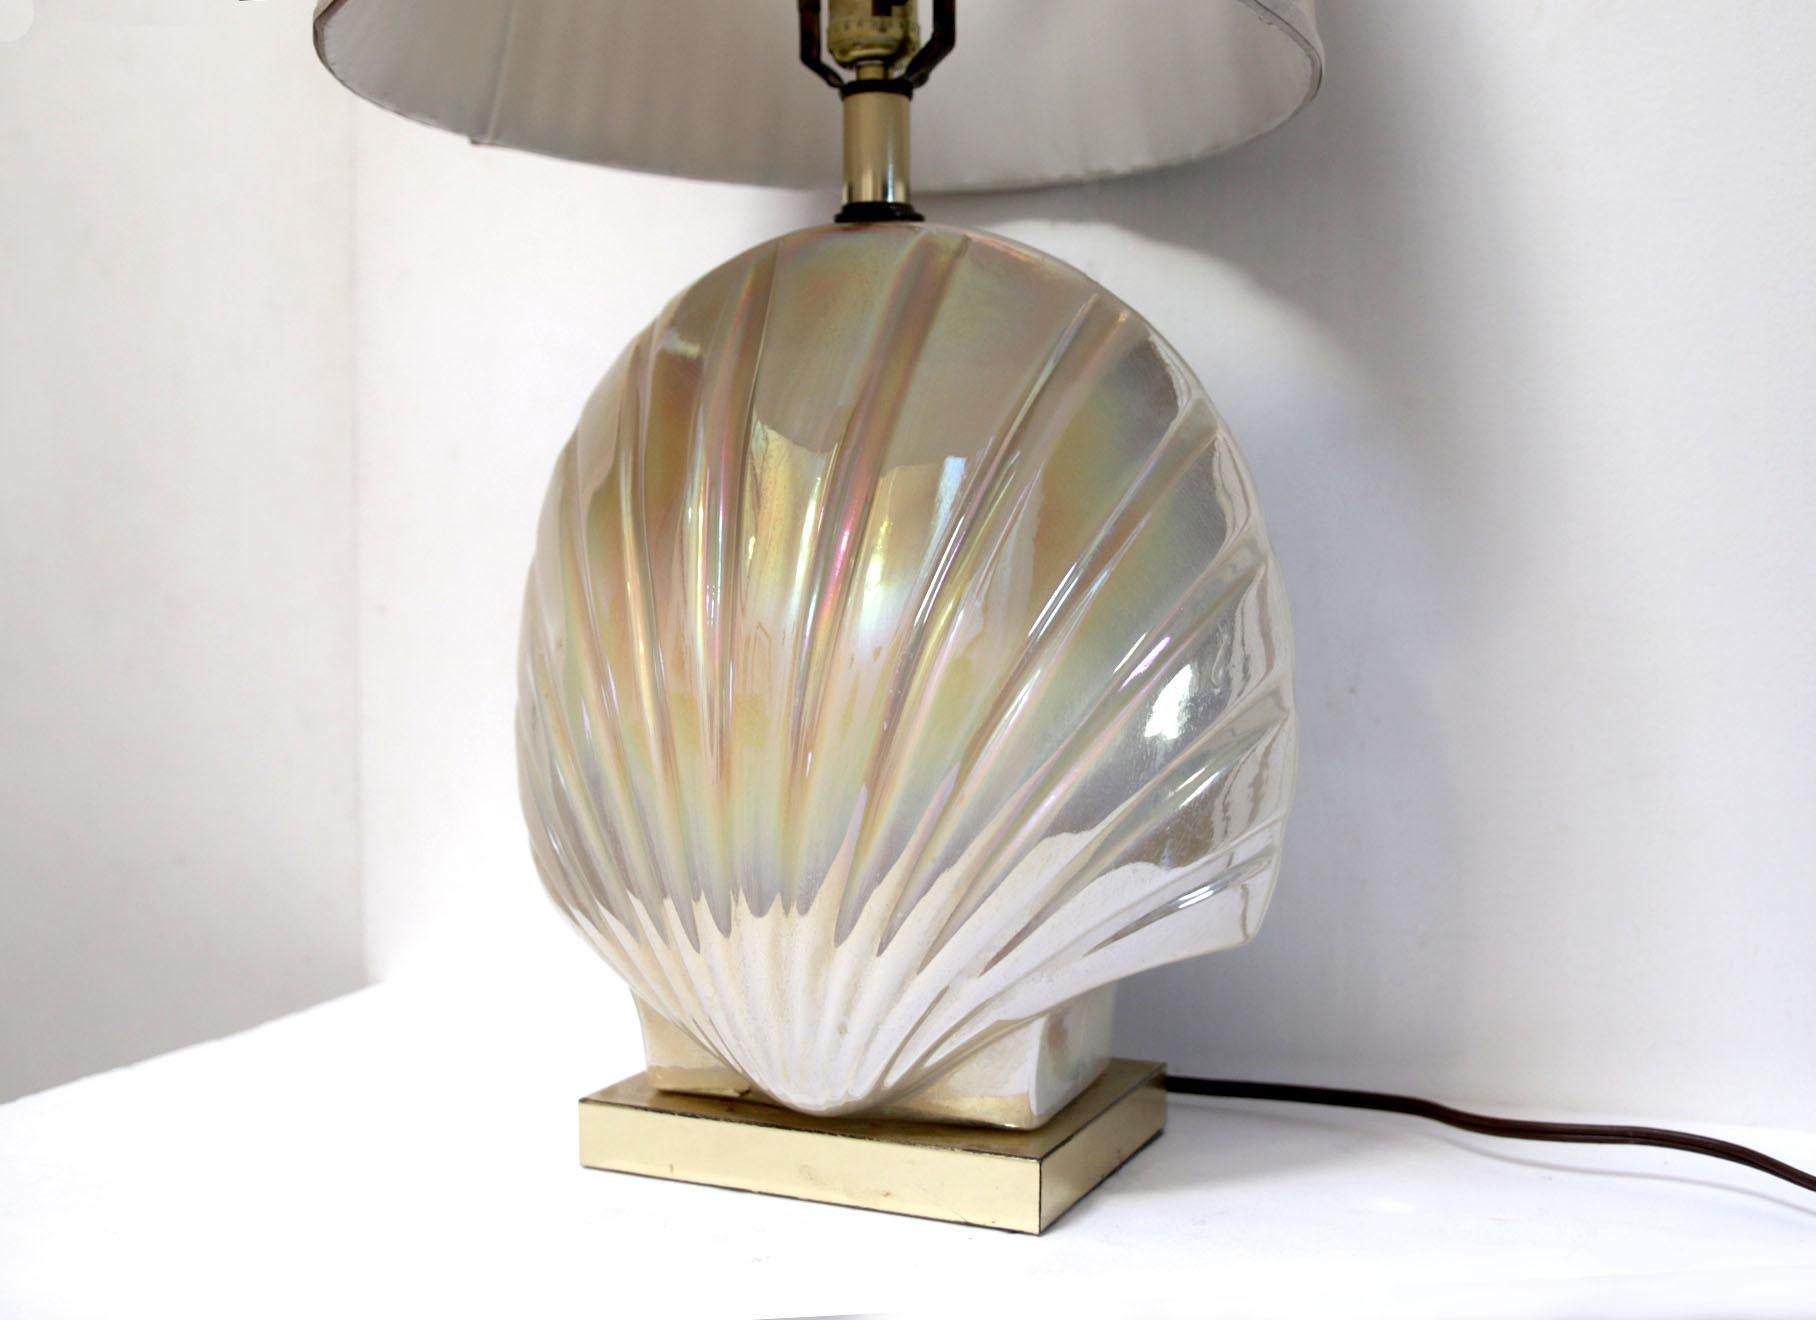 Form nearly matches function in this art deco style lamp with its pleated shade. The symmetry is apparent from the graceful base in its half-shell silhouette which seems to point toward the lampshade. The lamp base is an eggshell white color that is